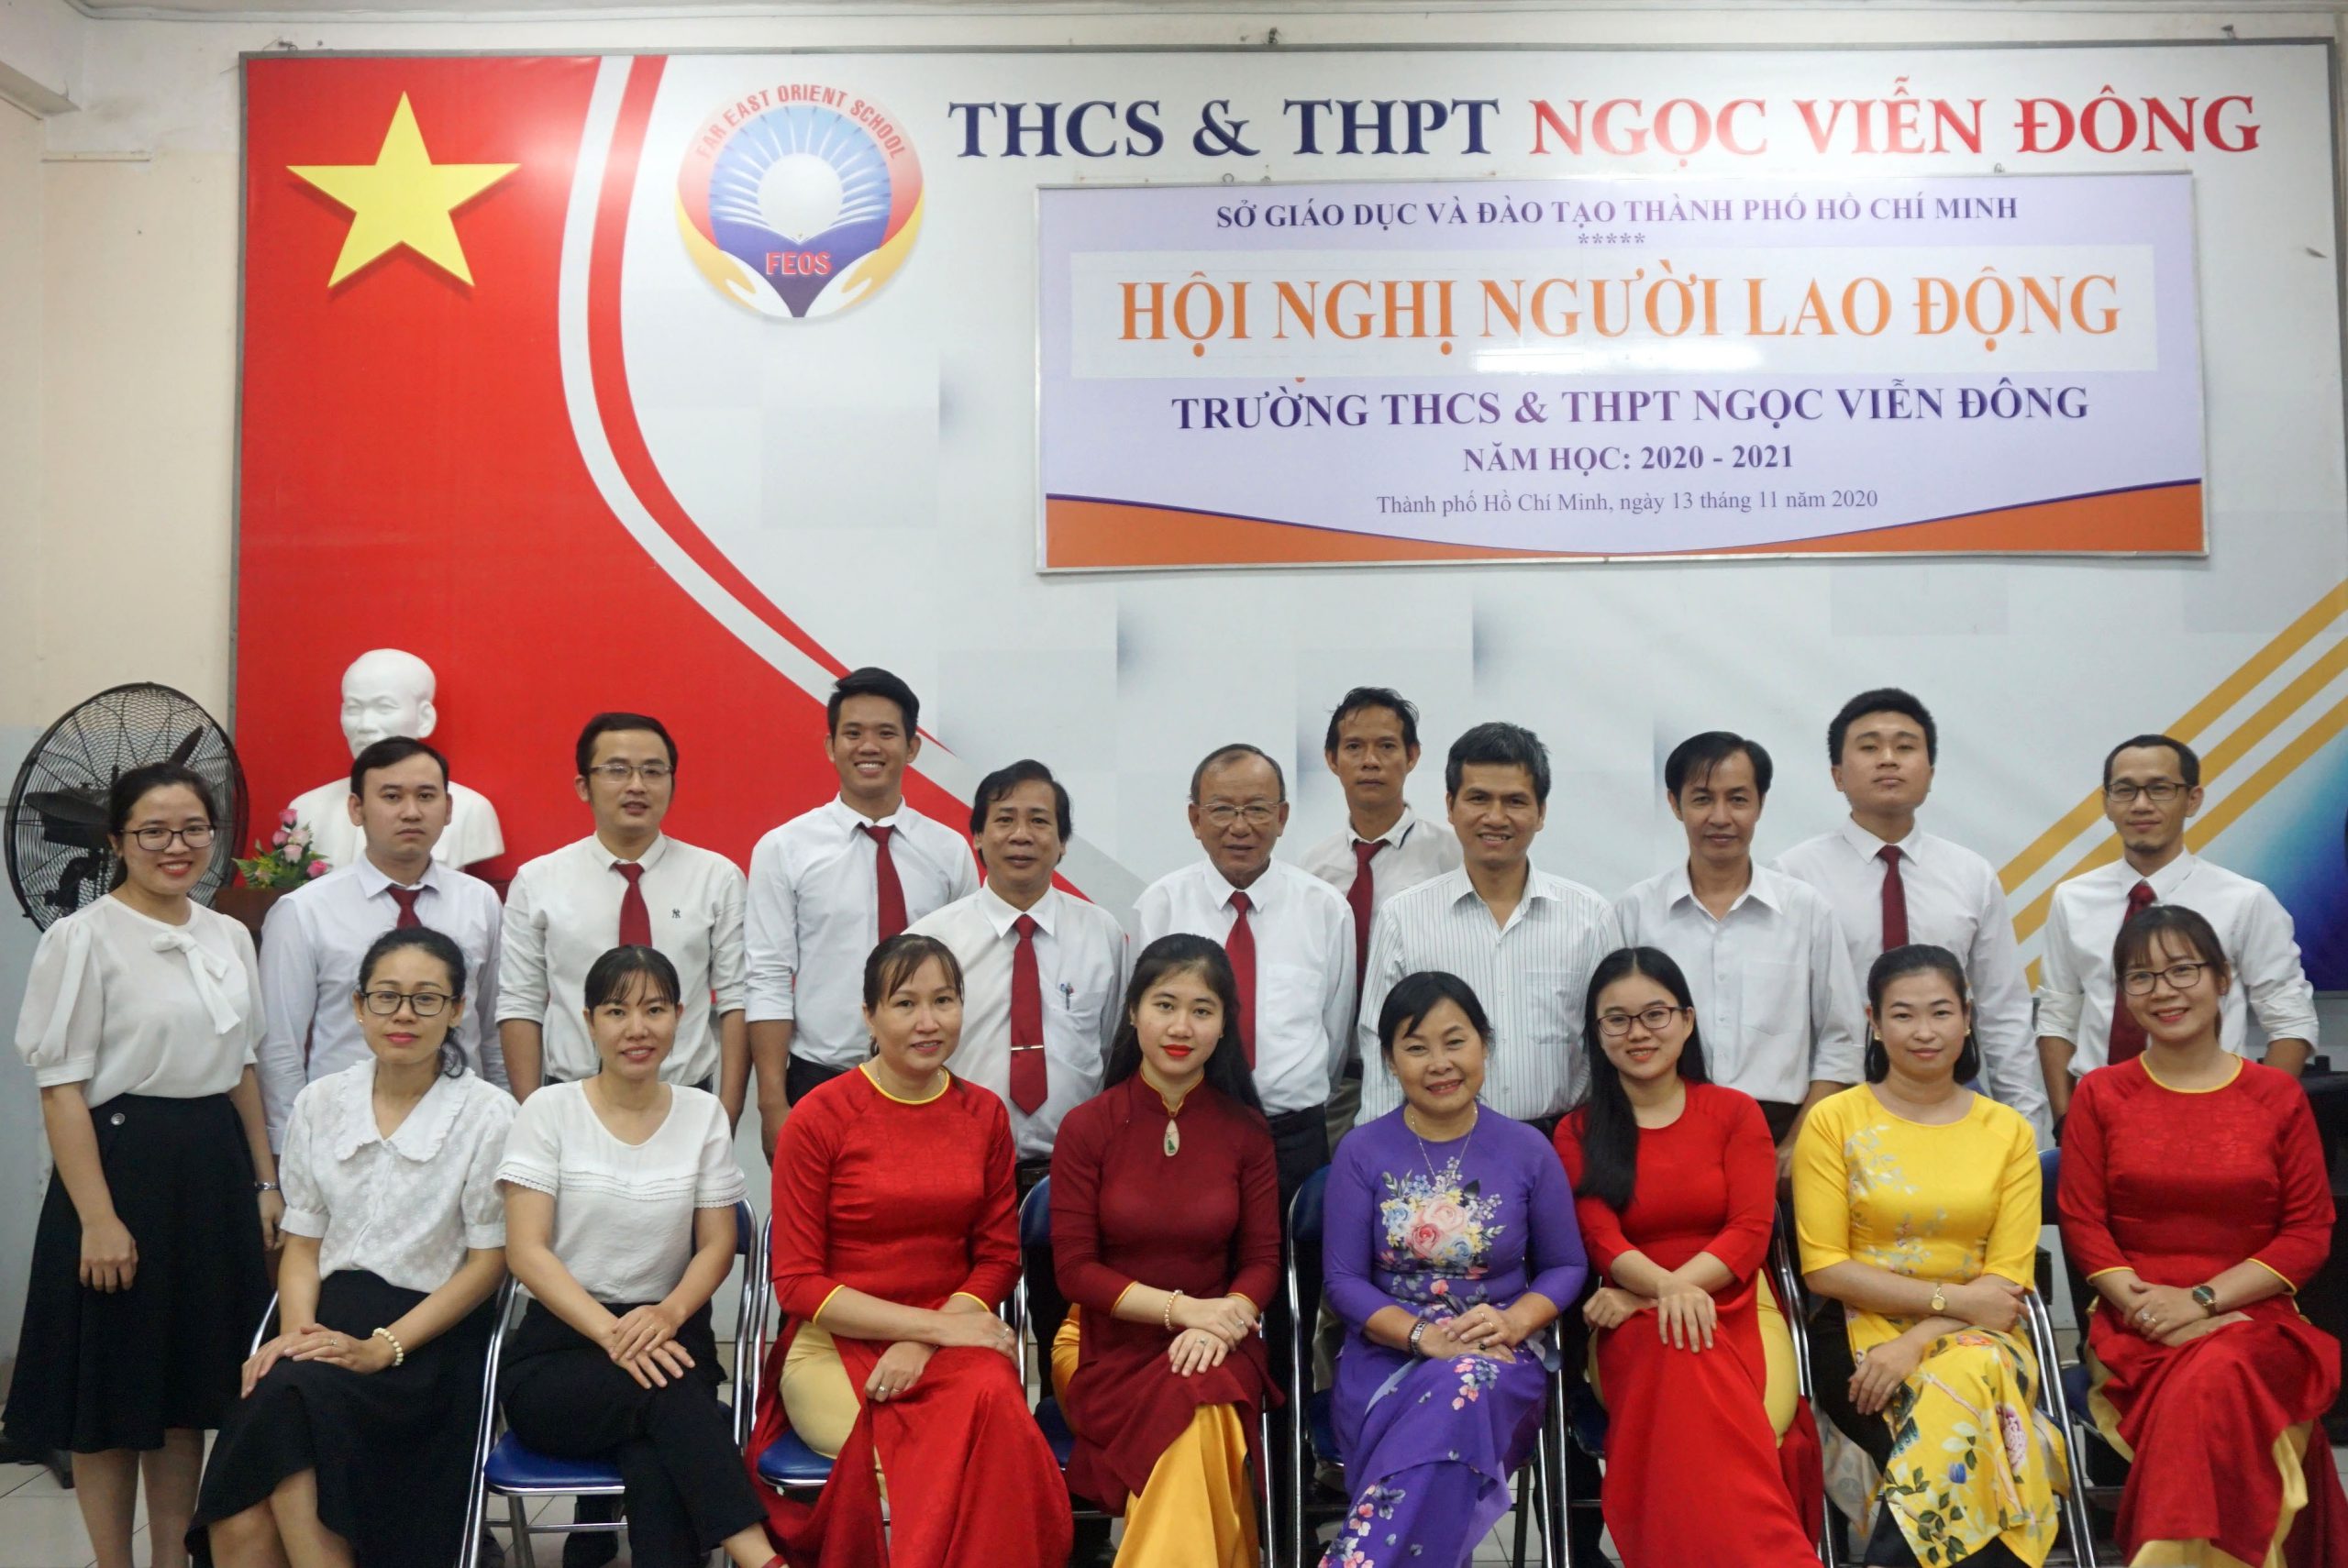 Toan The Thanh Vien Tham Gia Hoi Nghi Nguoi Lao Dong